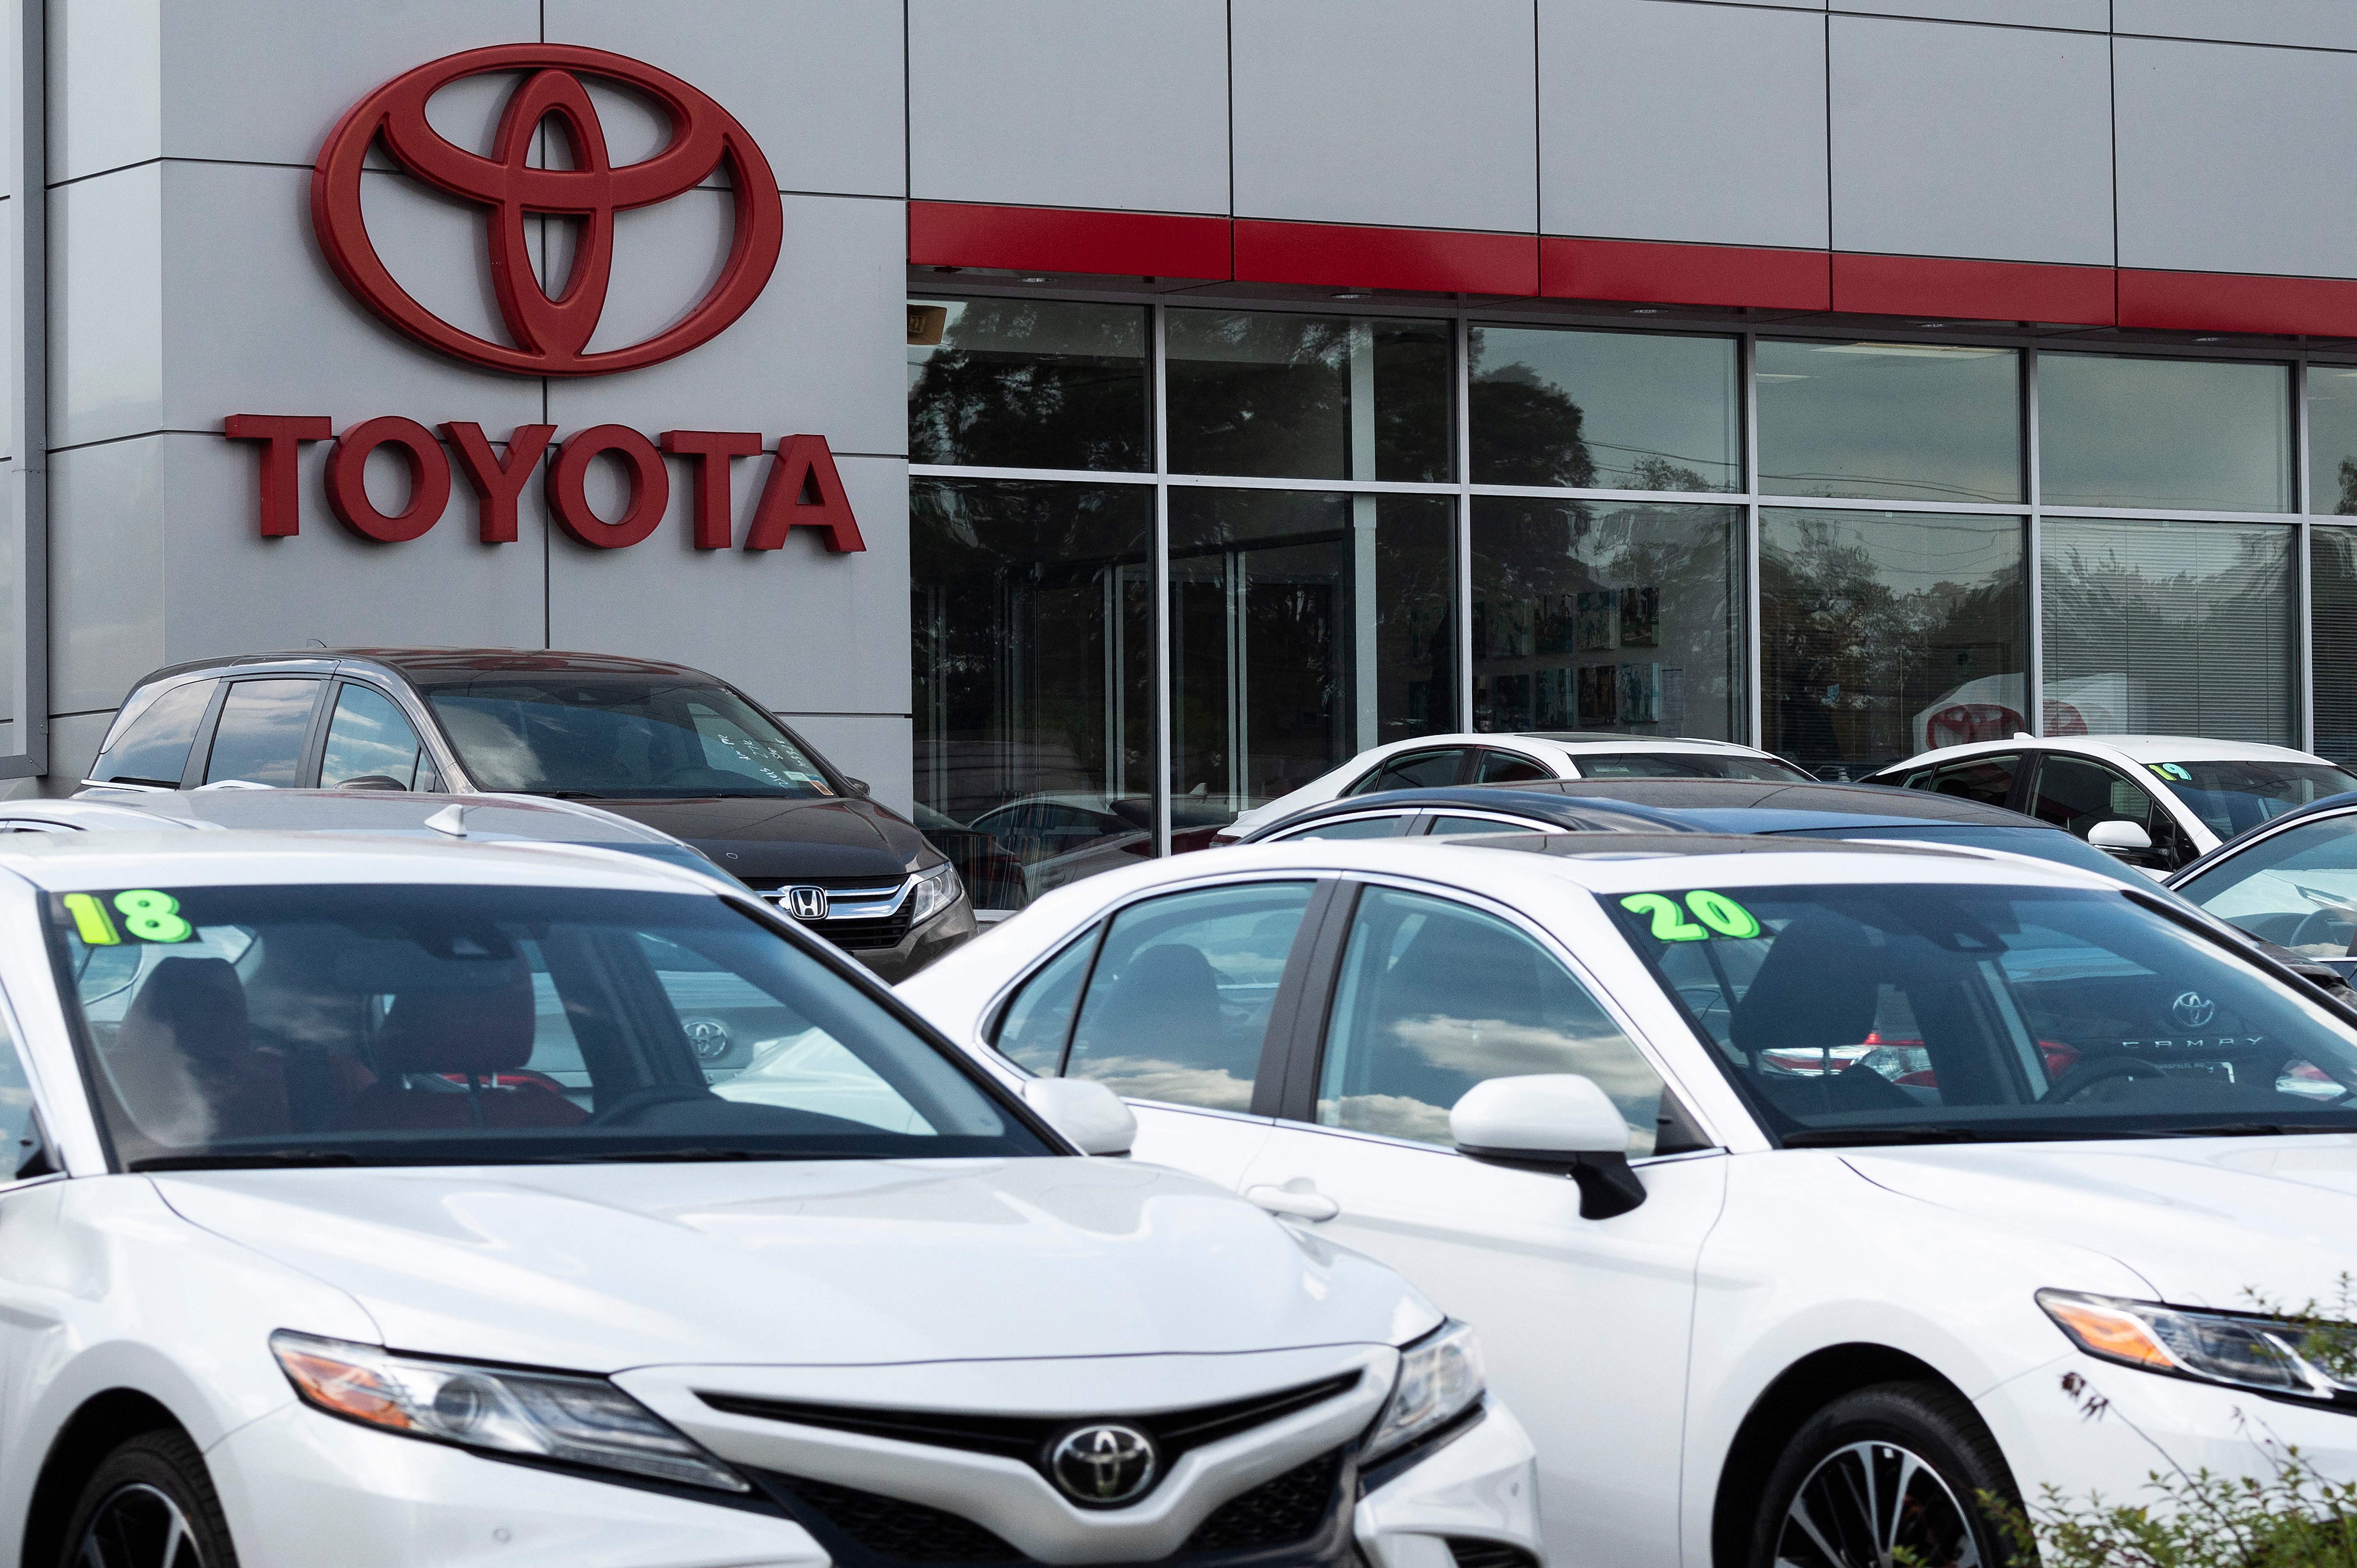 Toyota tops GM sales in the U.S., expected to be America’s best-selling automaker